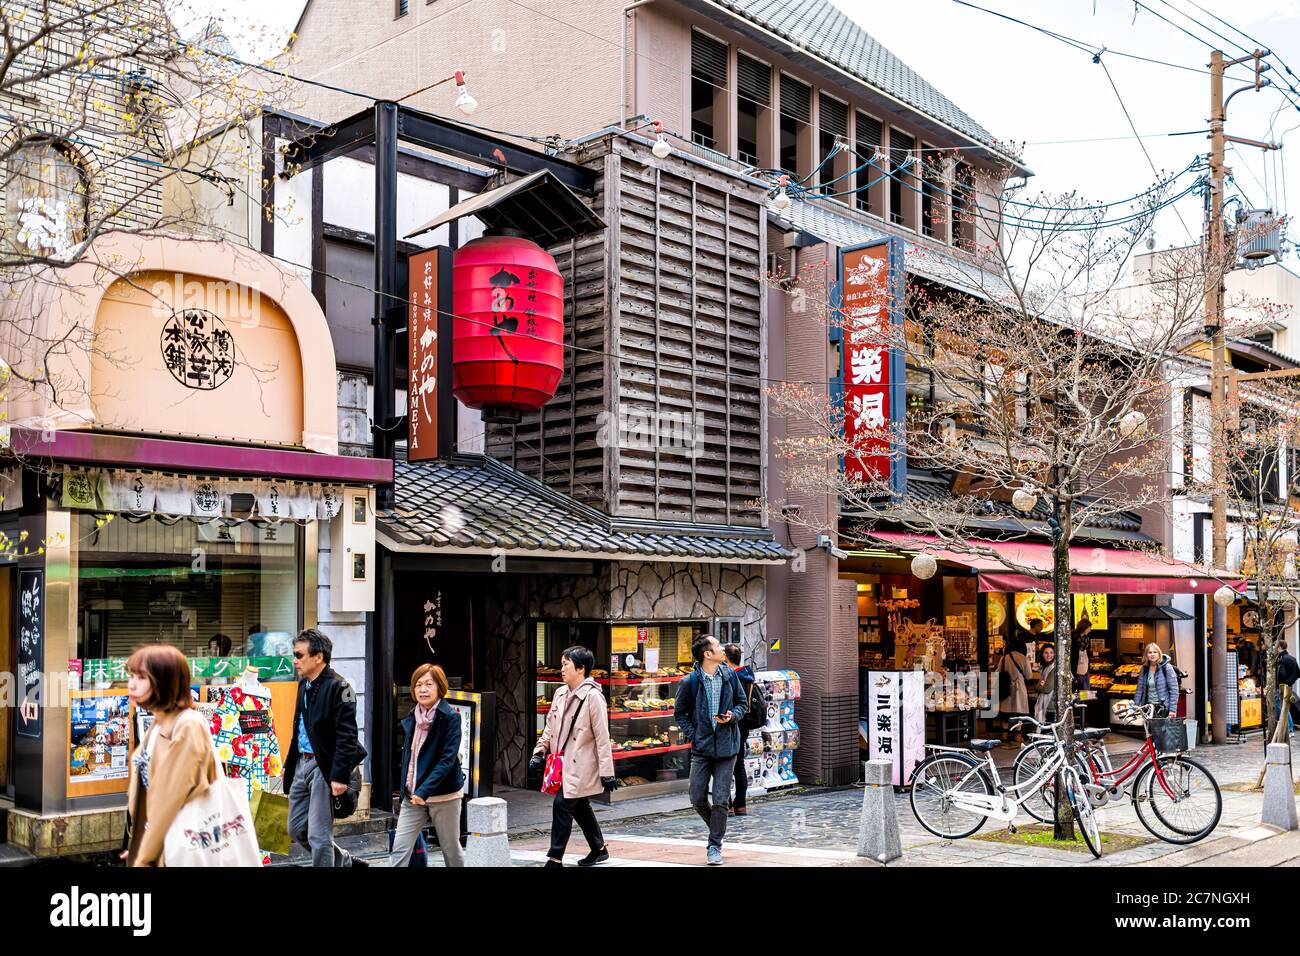 Nara, Japan - April 15, 2019: People many tourists walking on sidewalk street road in downtown city towards park with shops stores and signs Stock Photo